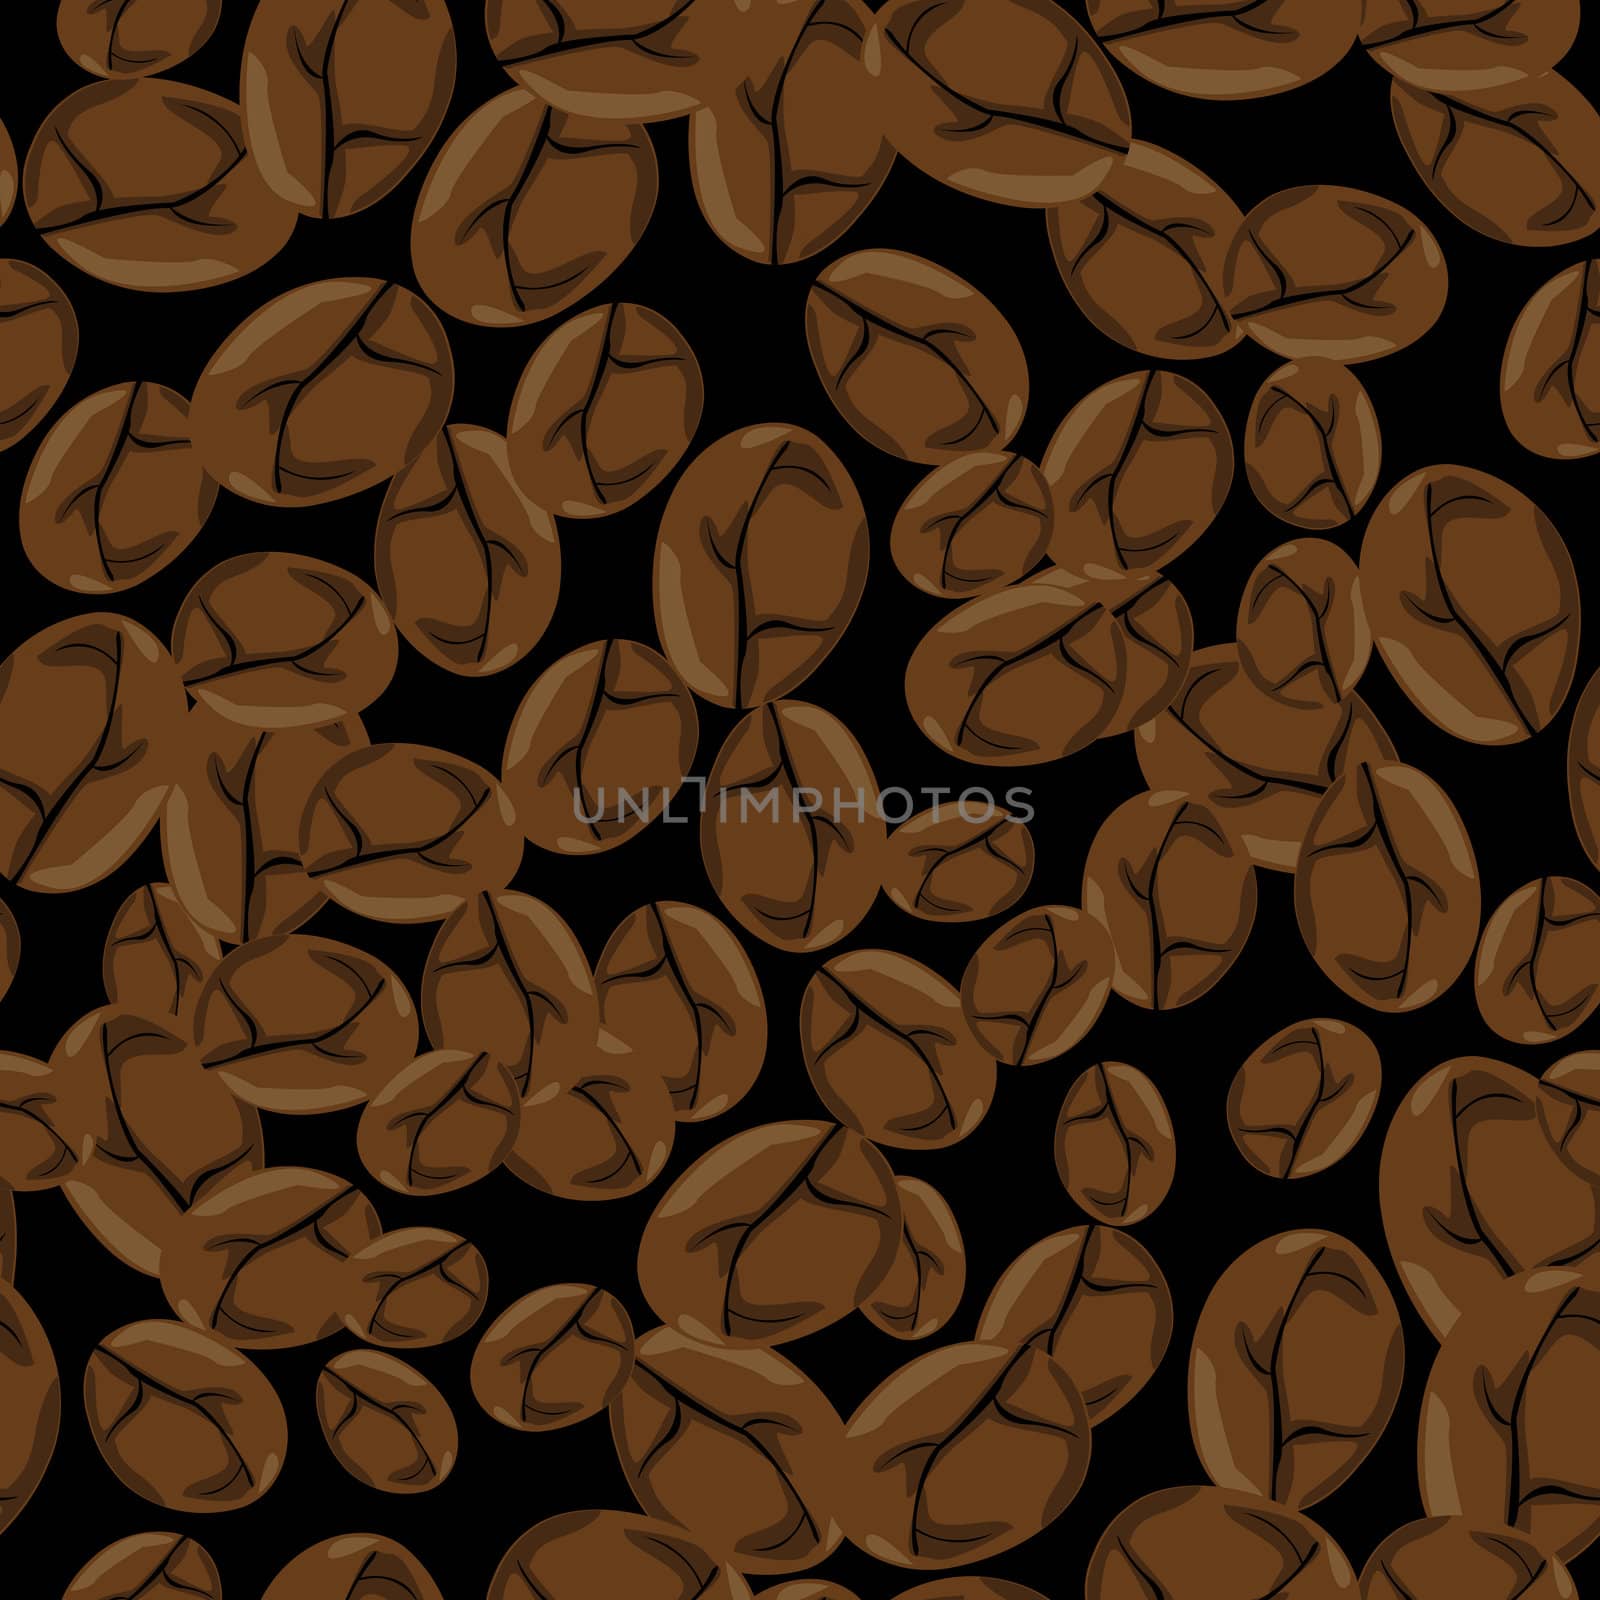 Roasted coffee beans, pattern background